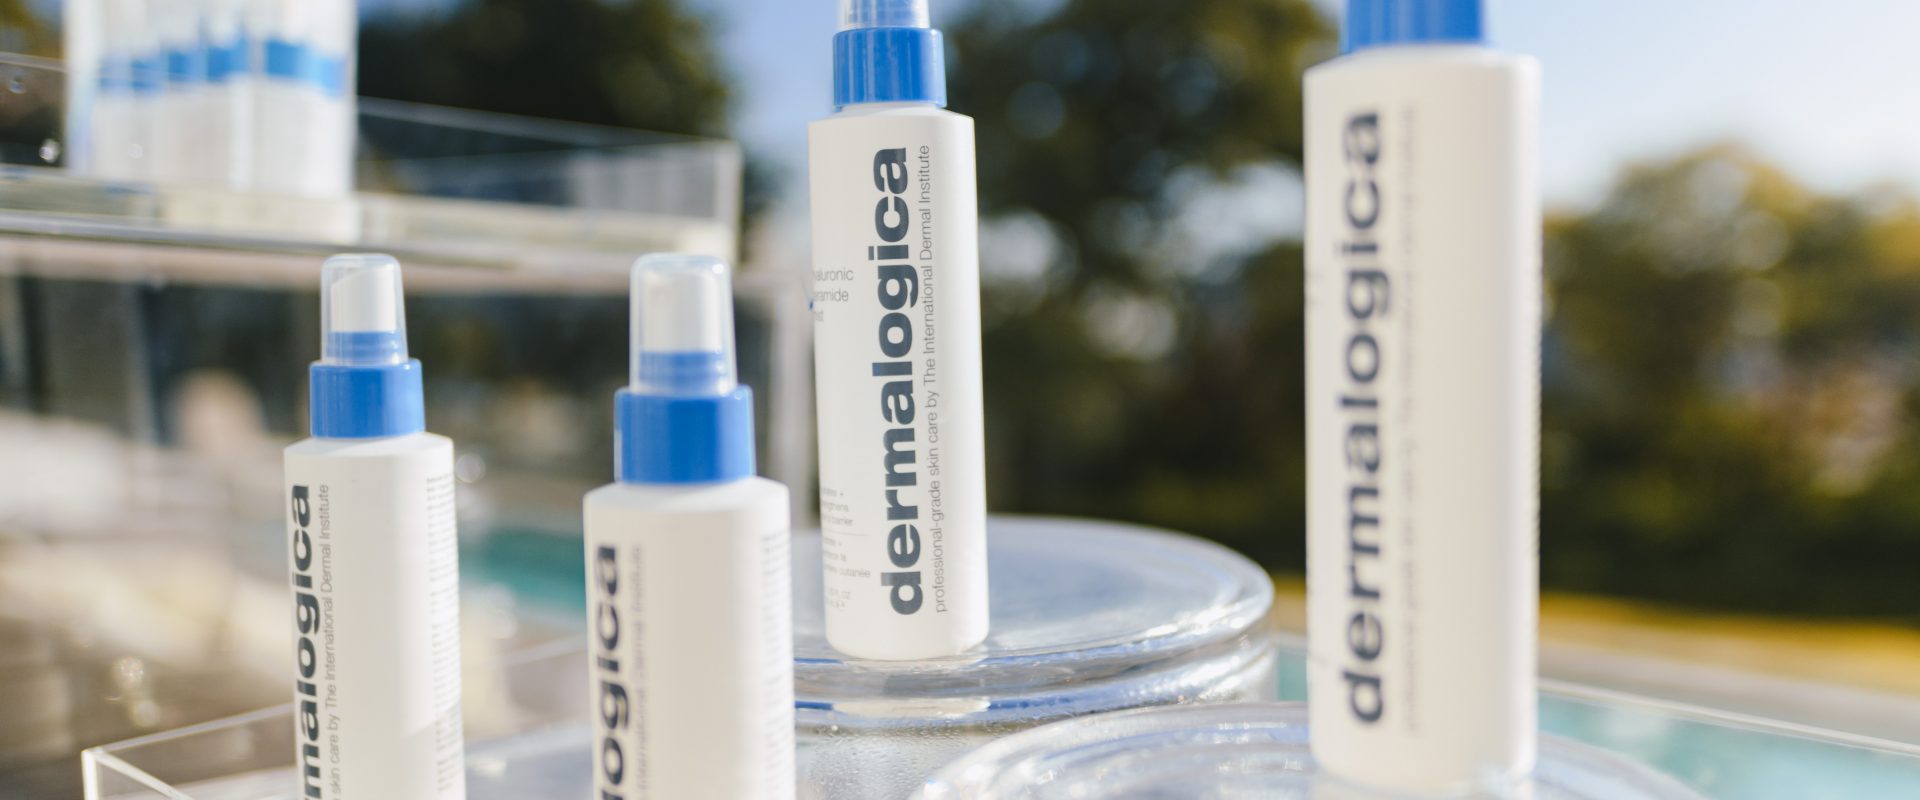 Dermalogica launches all-new hydrating products range